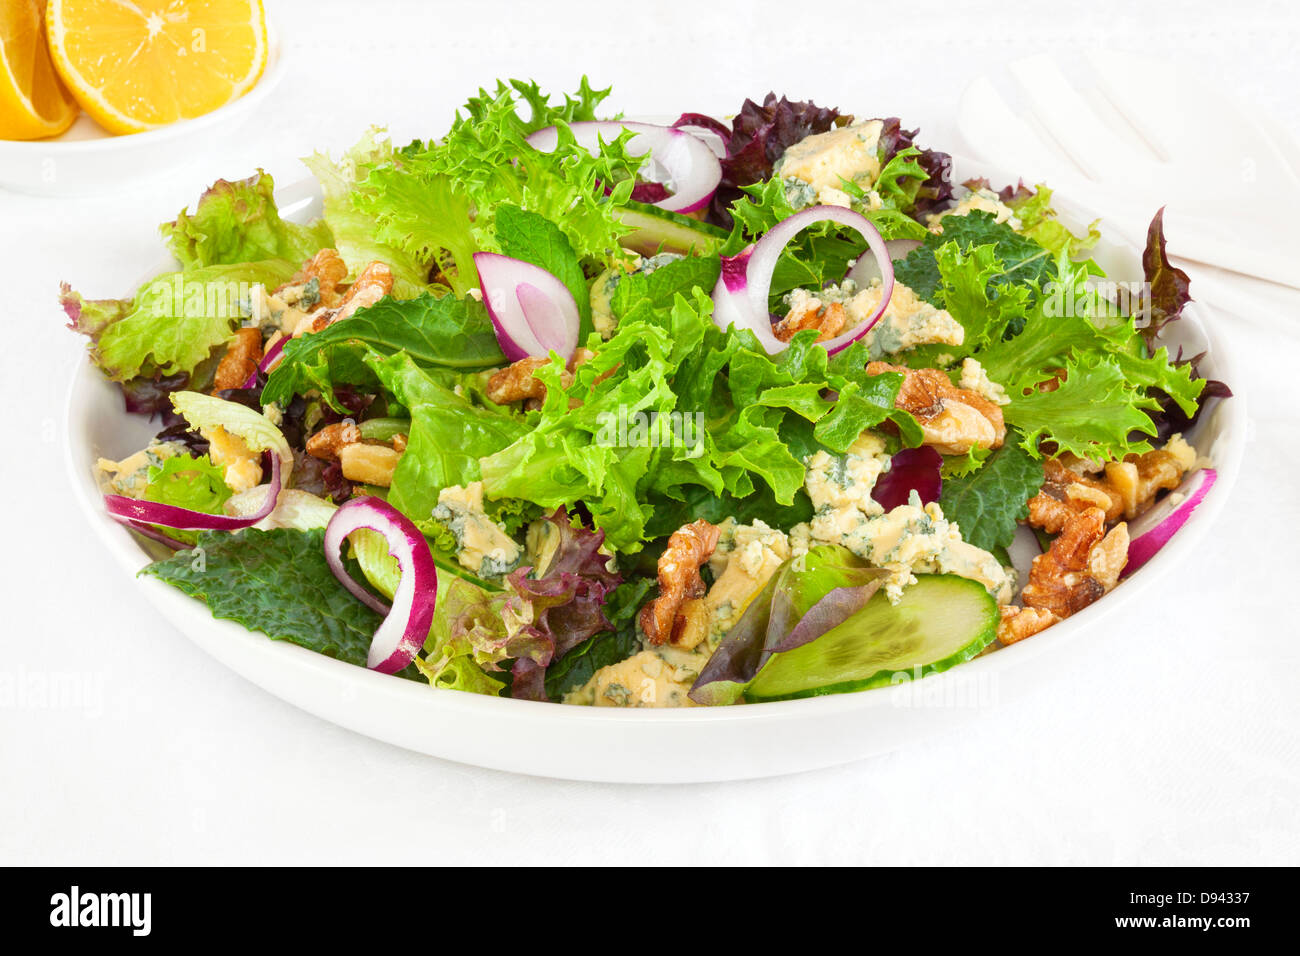 Salad with walnuts and blue cheese, cucumber and onion, and lettuce. Stock Photo